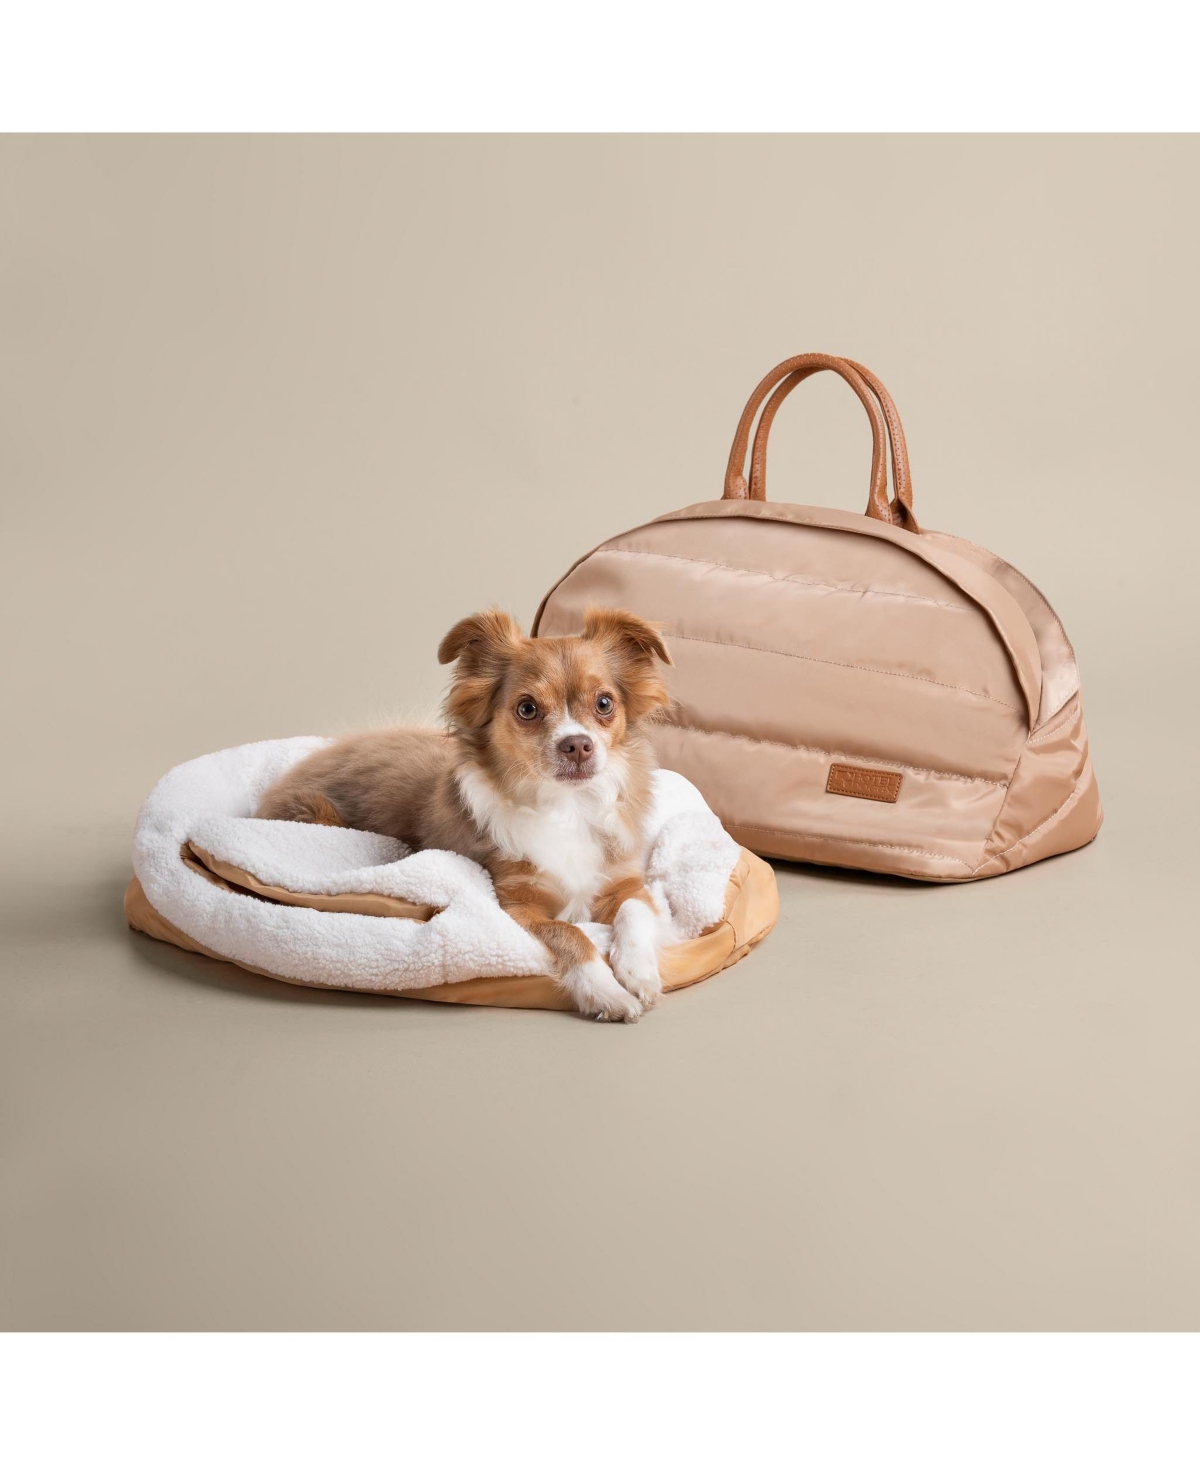 Deluxe Car Seat & Carrier - Tan